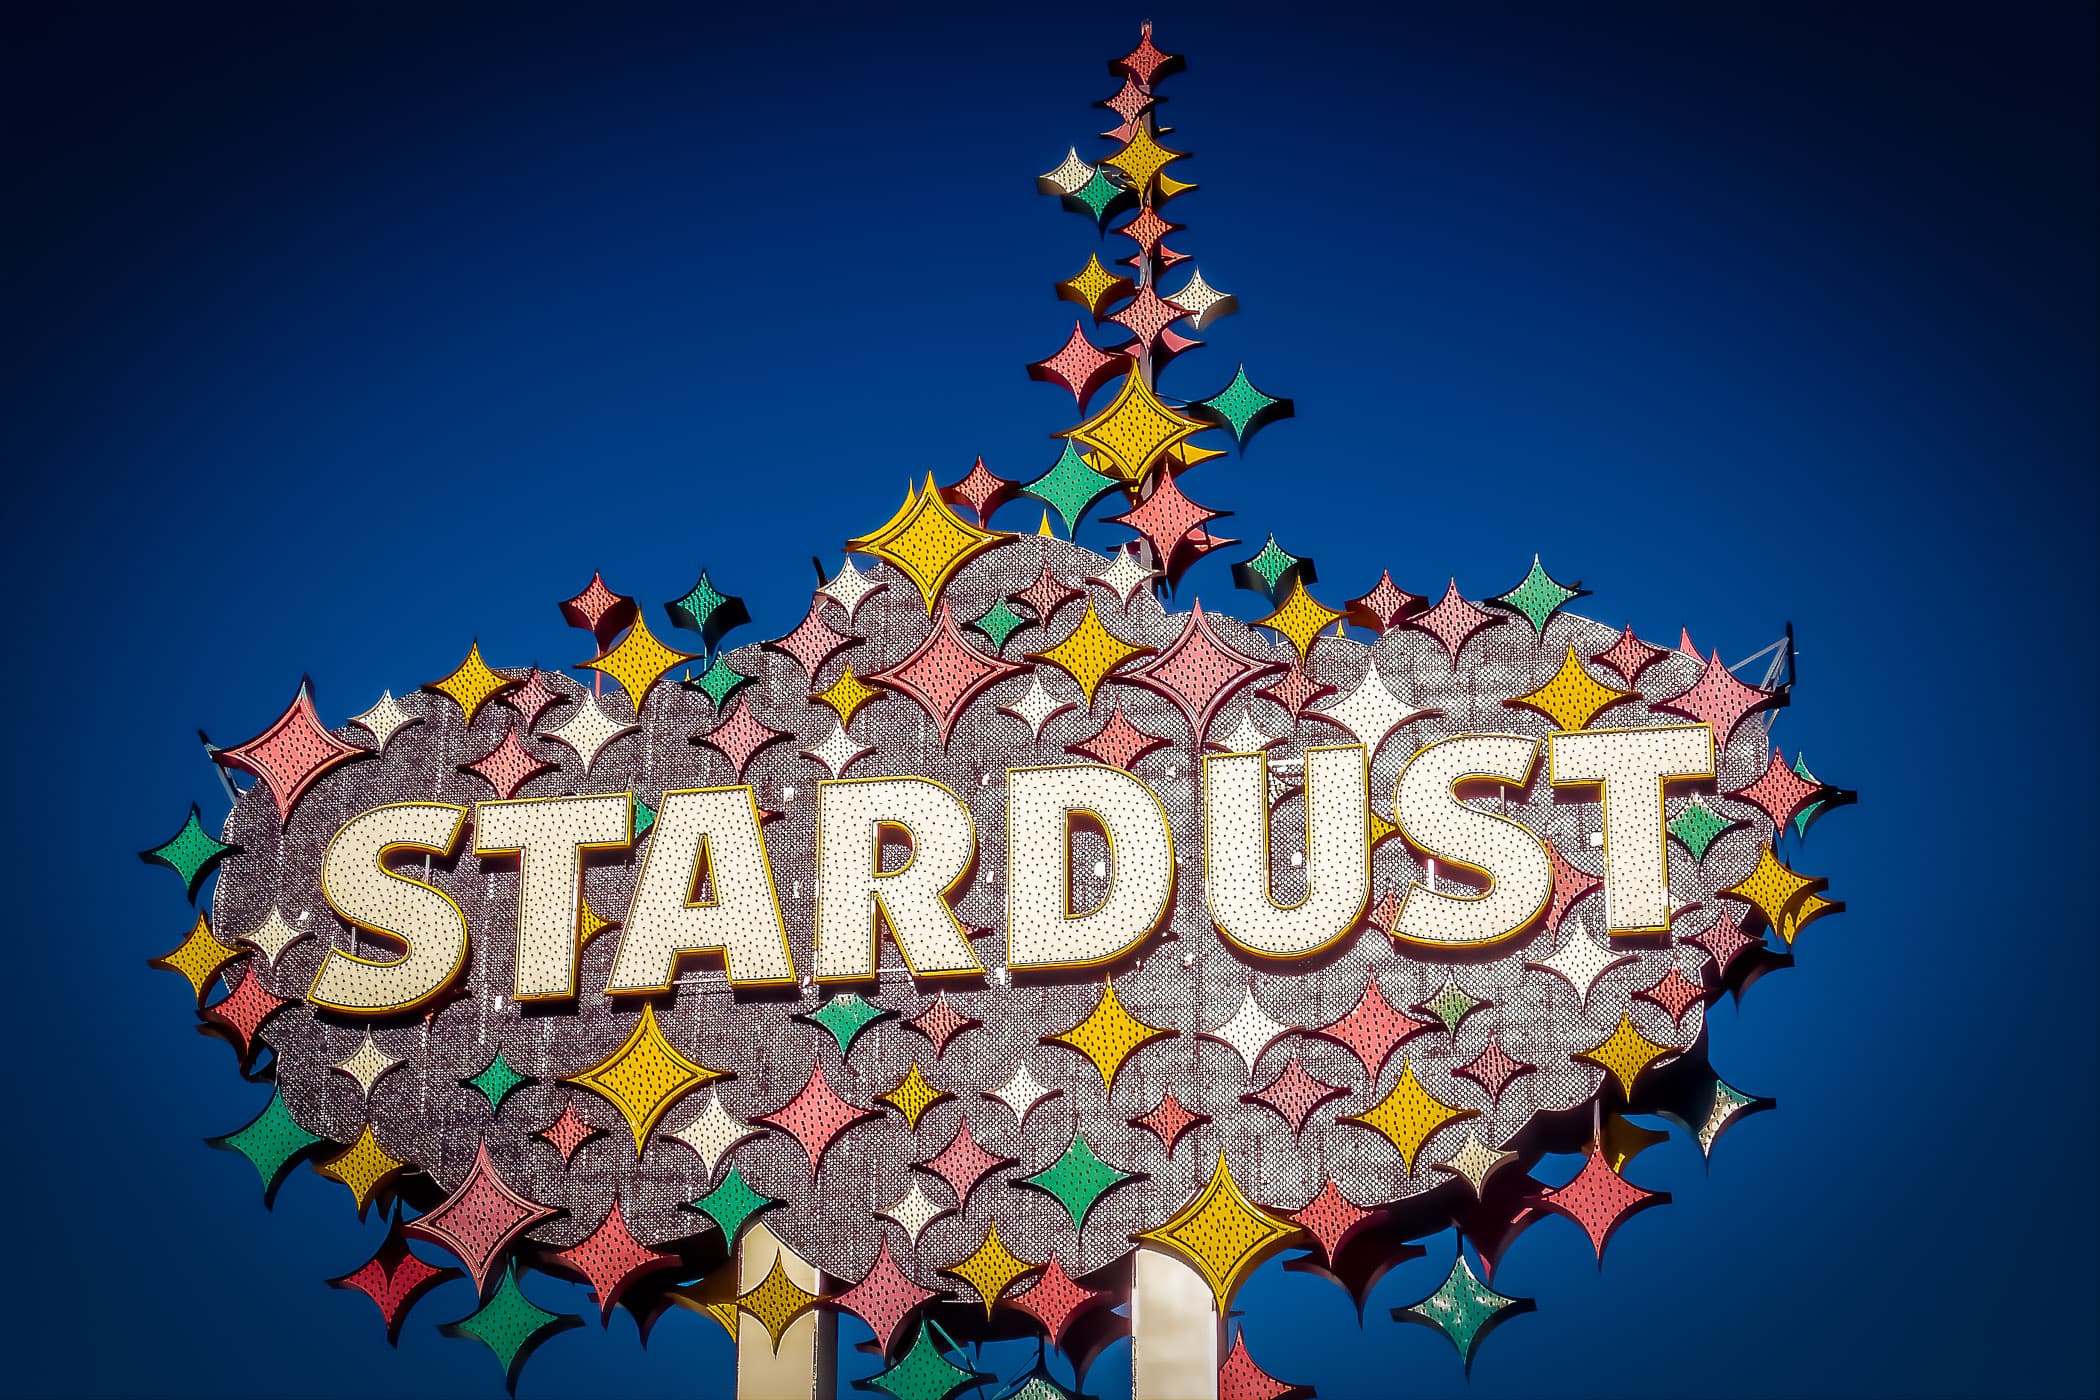 The sign at the Stardust Casino in Las Vegas shortly before it was torn down in 2007.